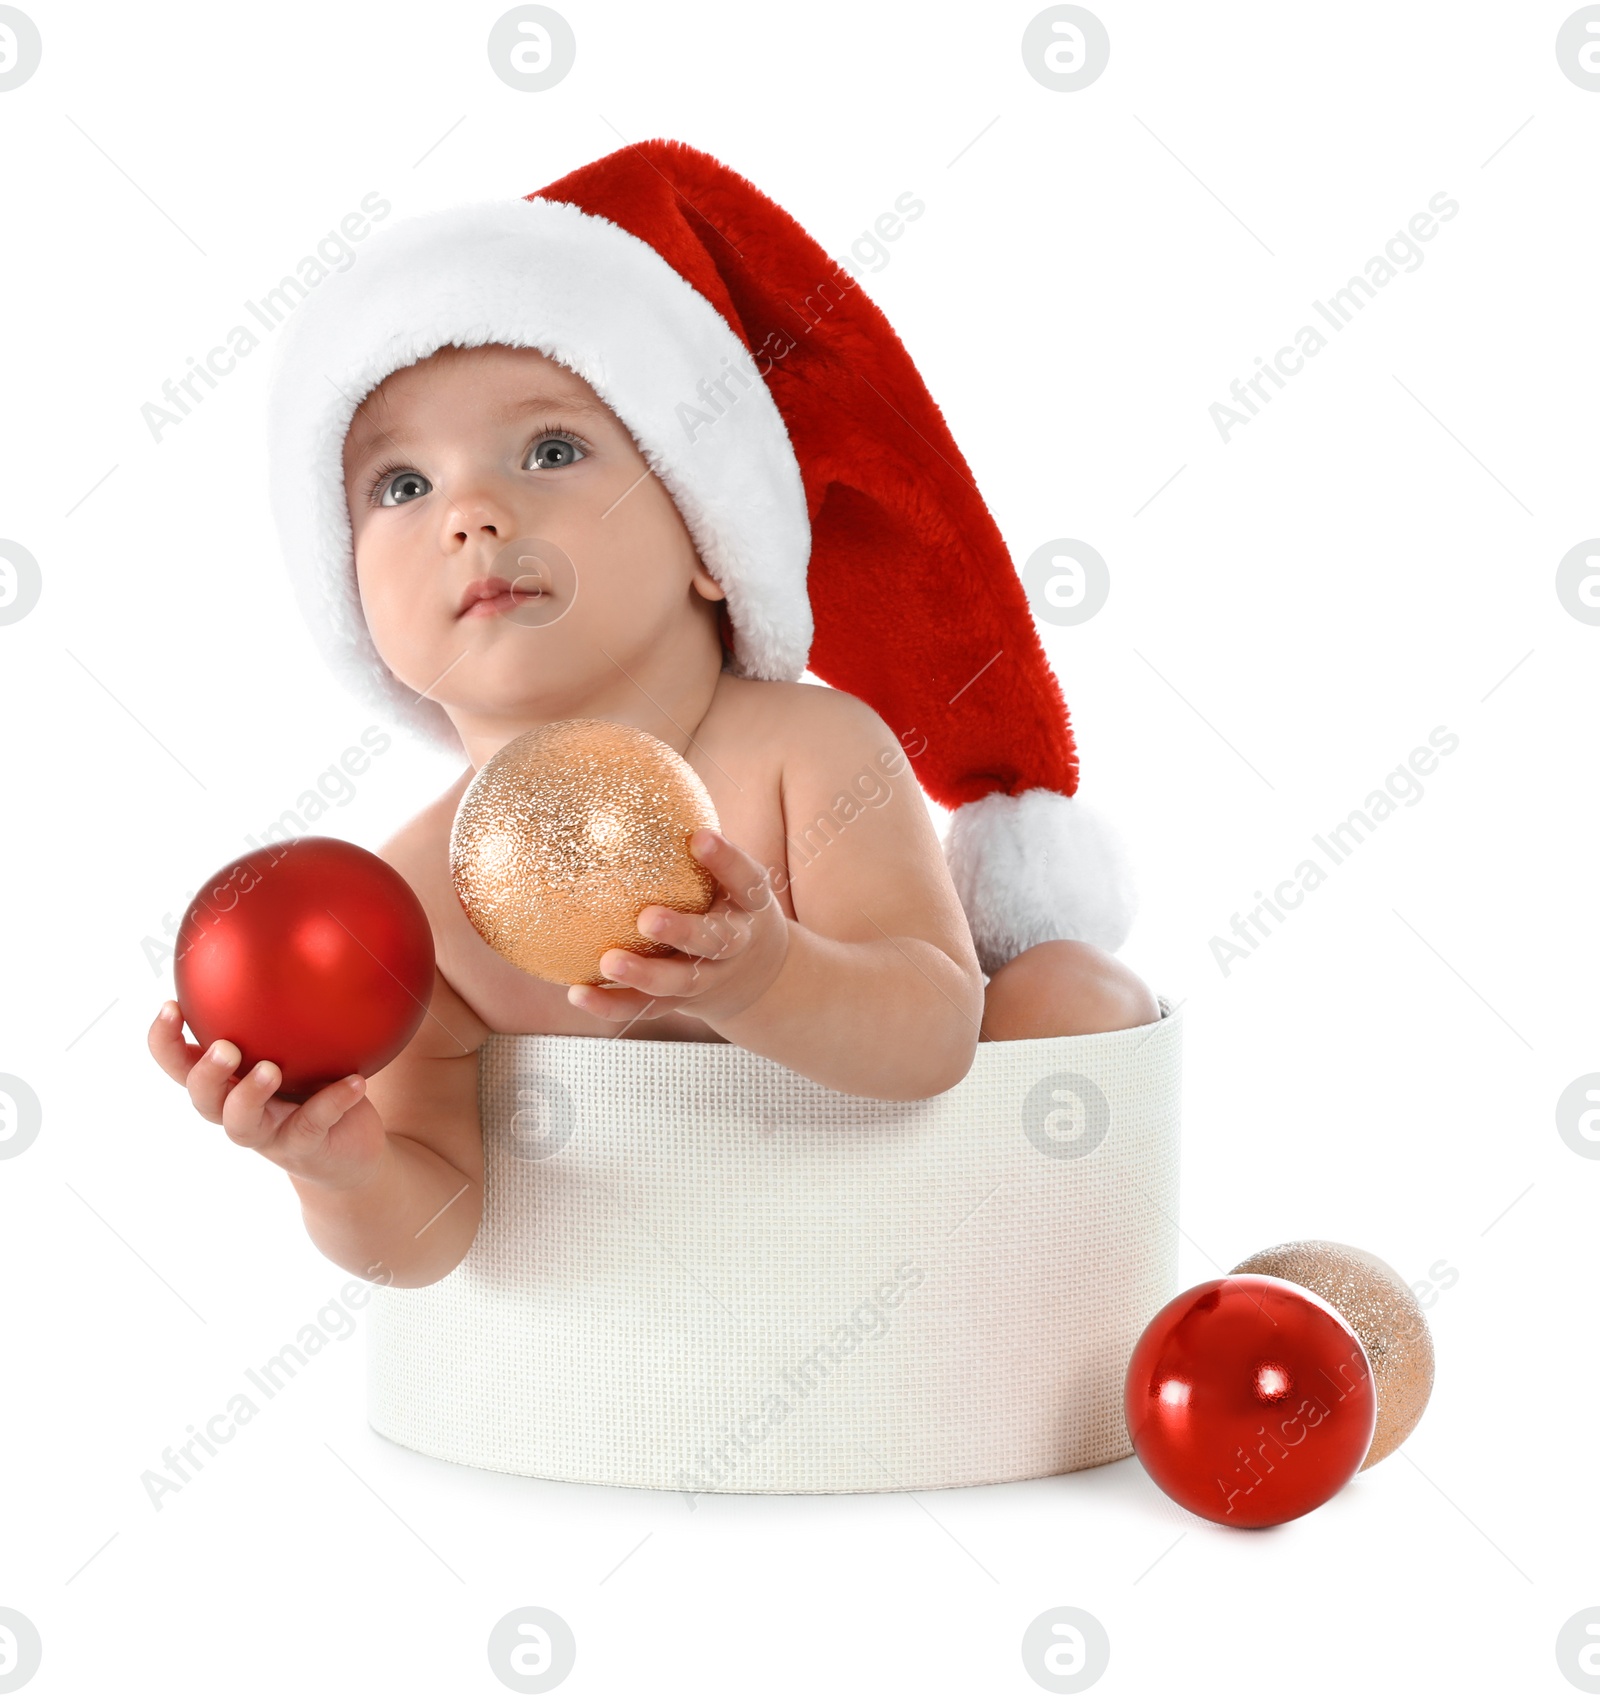 Photo of Cute little baby wearing Santa hat sitting in box with Christmas decorations on white background